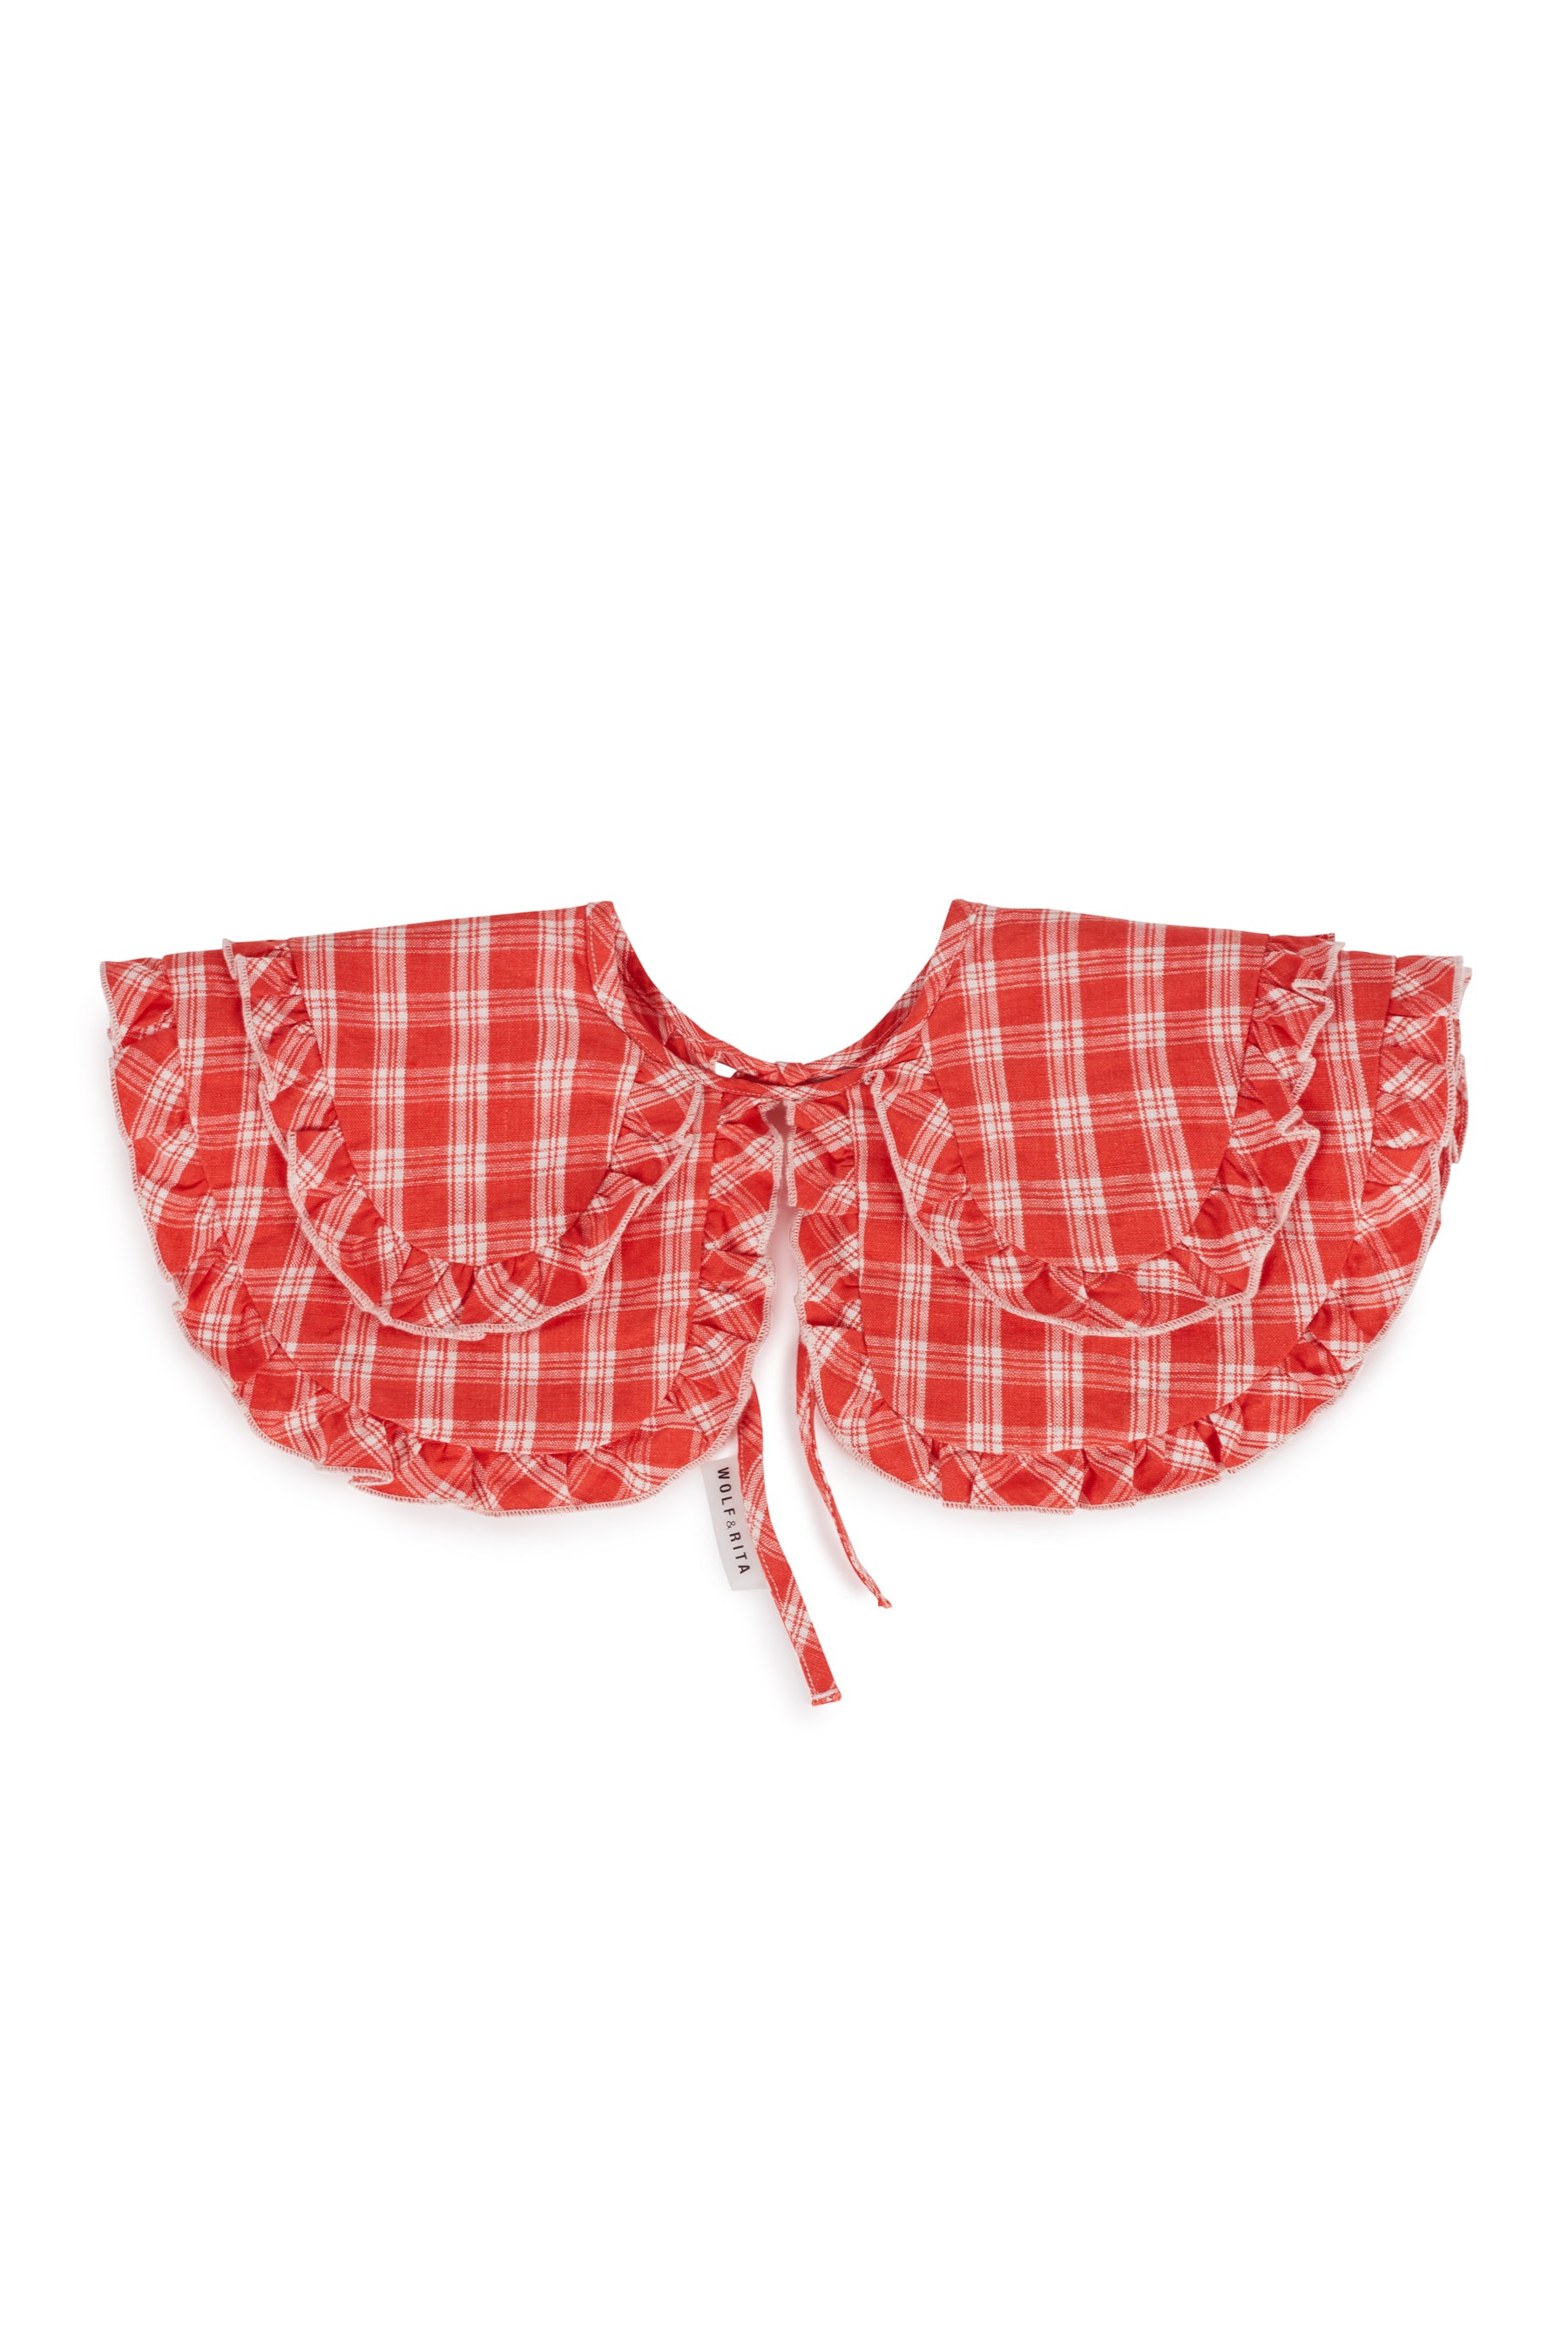 Carmo Cherry Check [ONLINE EXCLUSIVE]